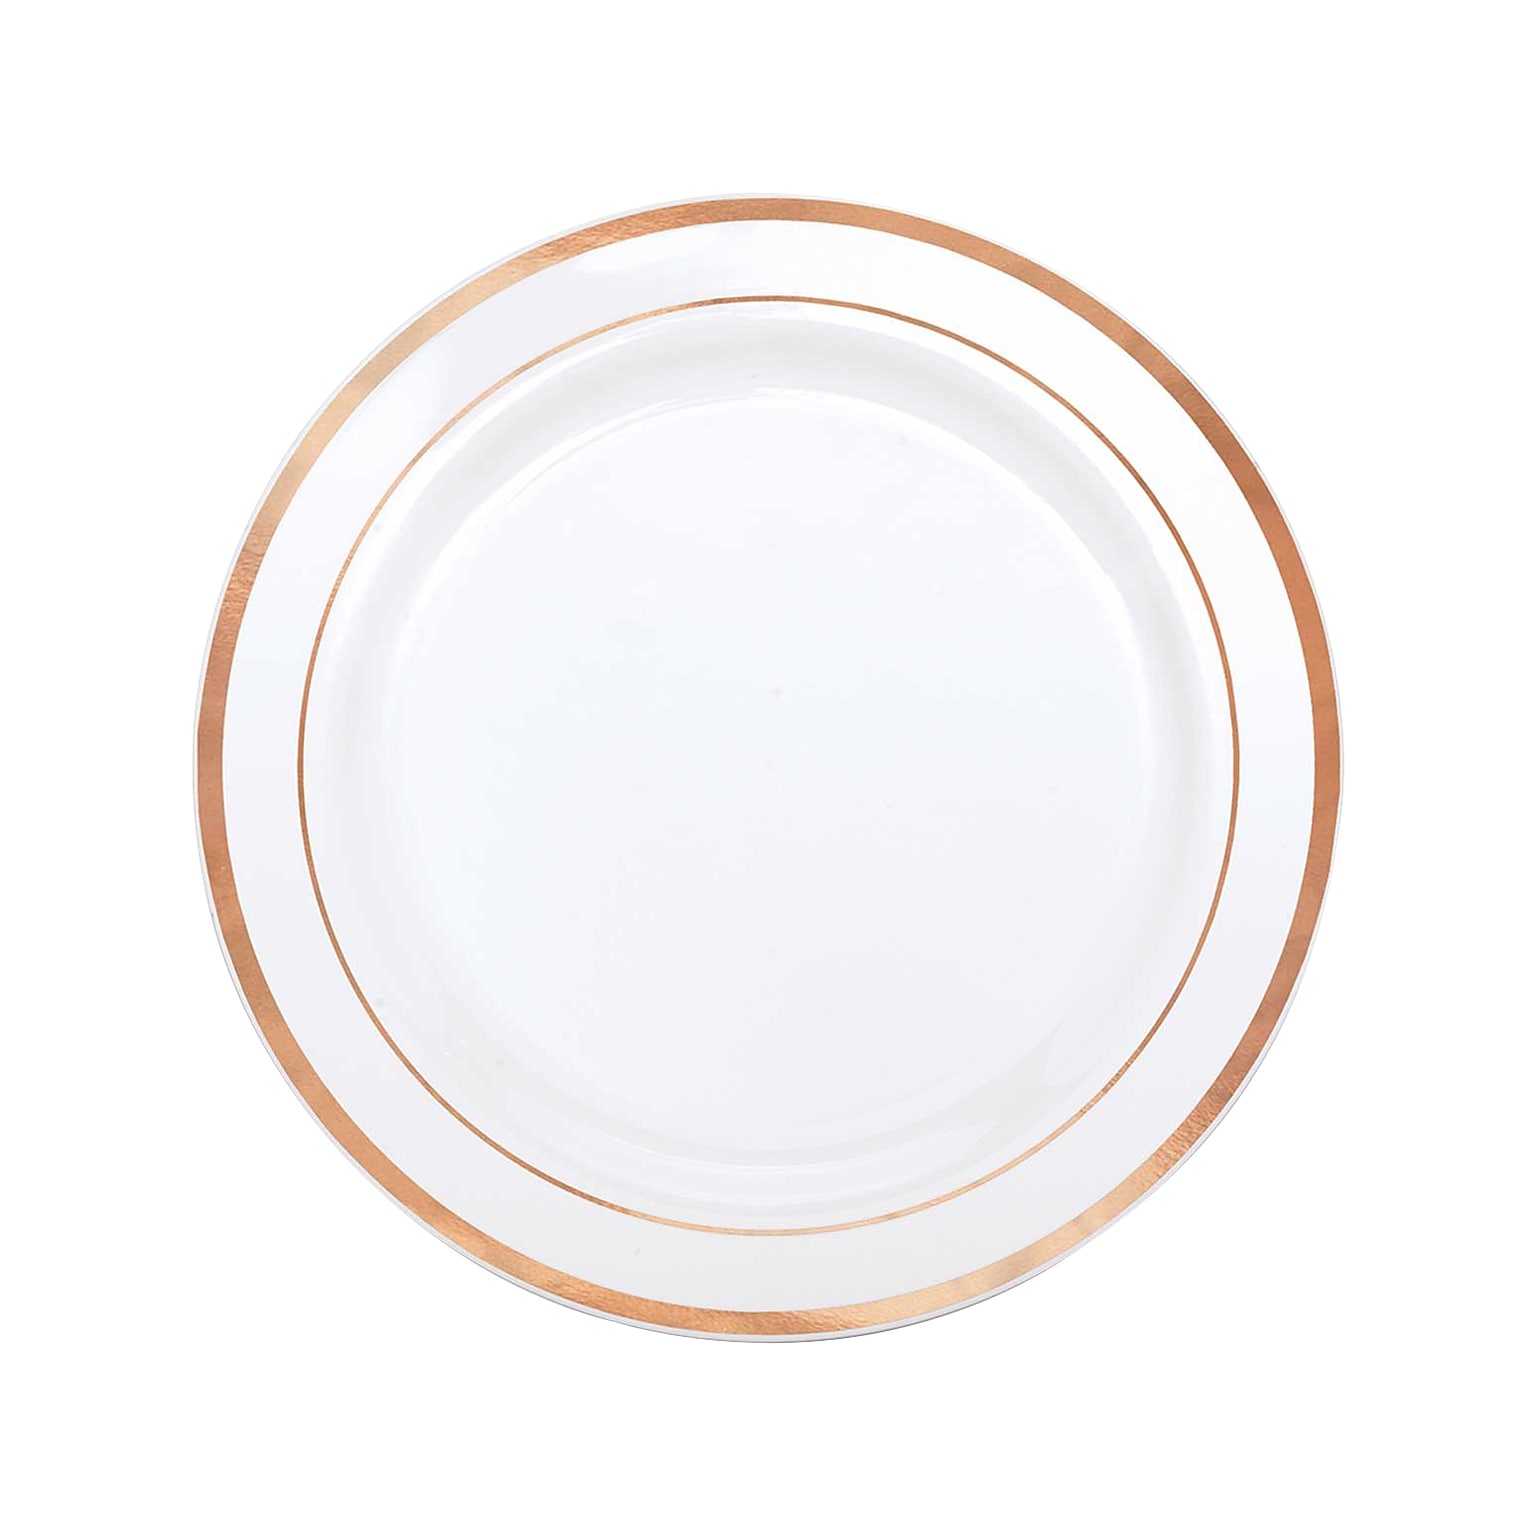 Amscan Premium Party Plate, White with Rose Gold Trim (430547)